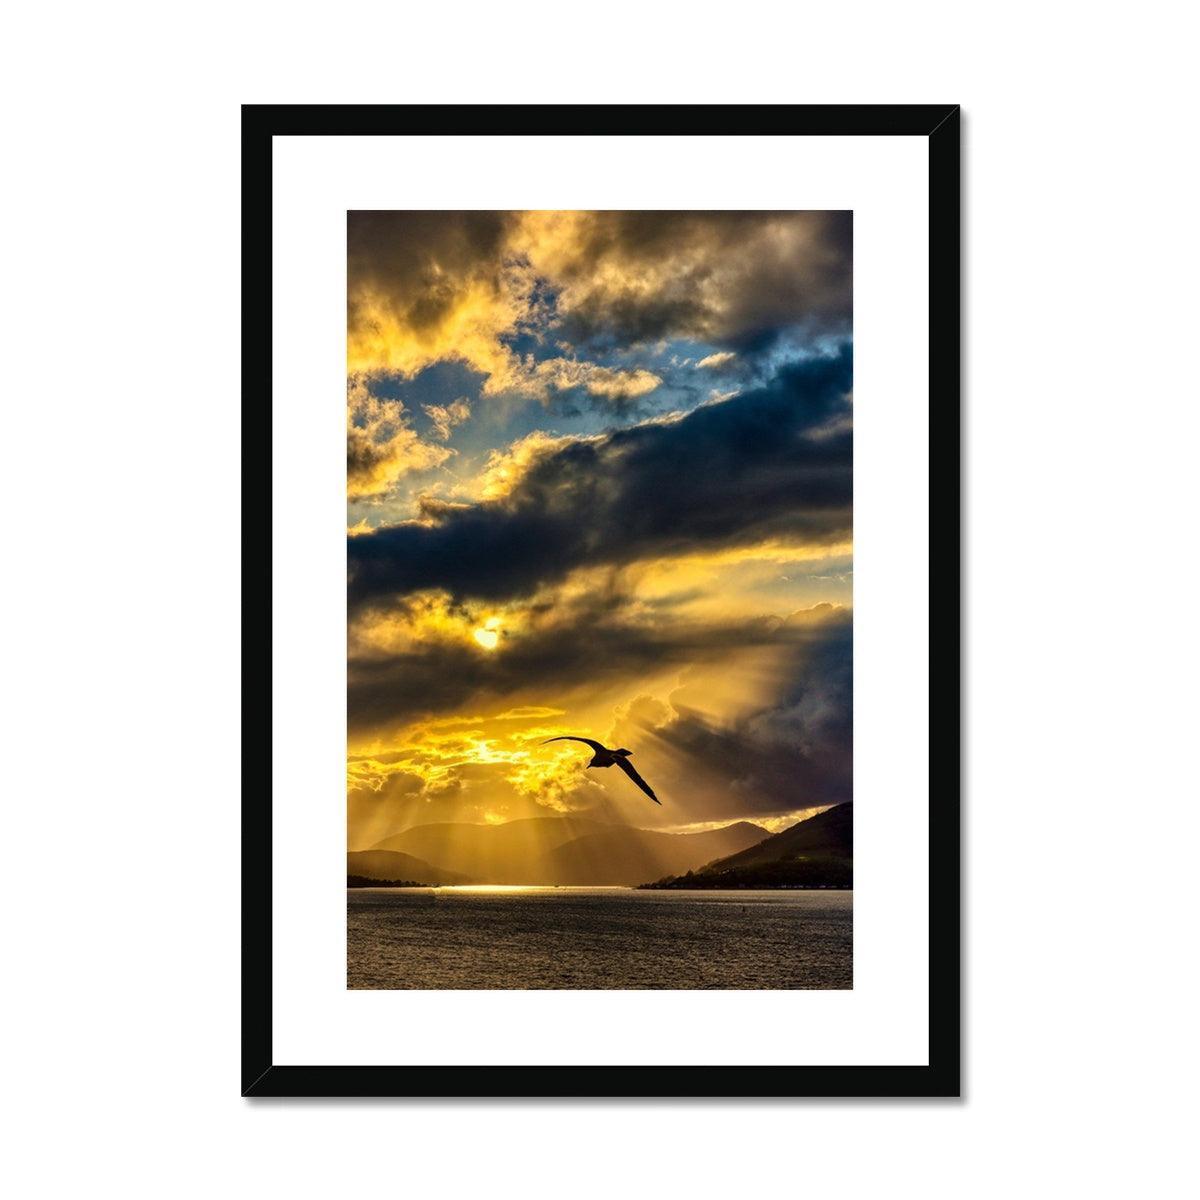 Seagull Soars During A River Clyde Sunset | Scottish Landscape Photography | Framed & Mounted Print